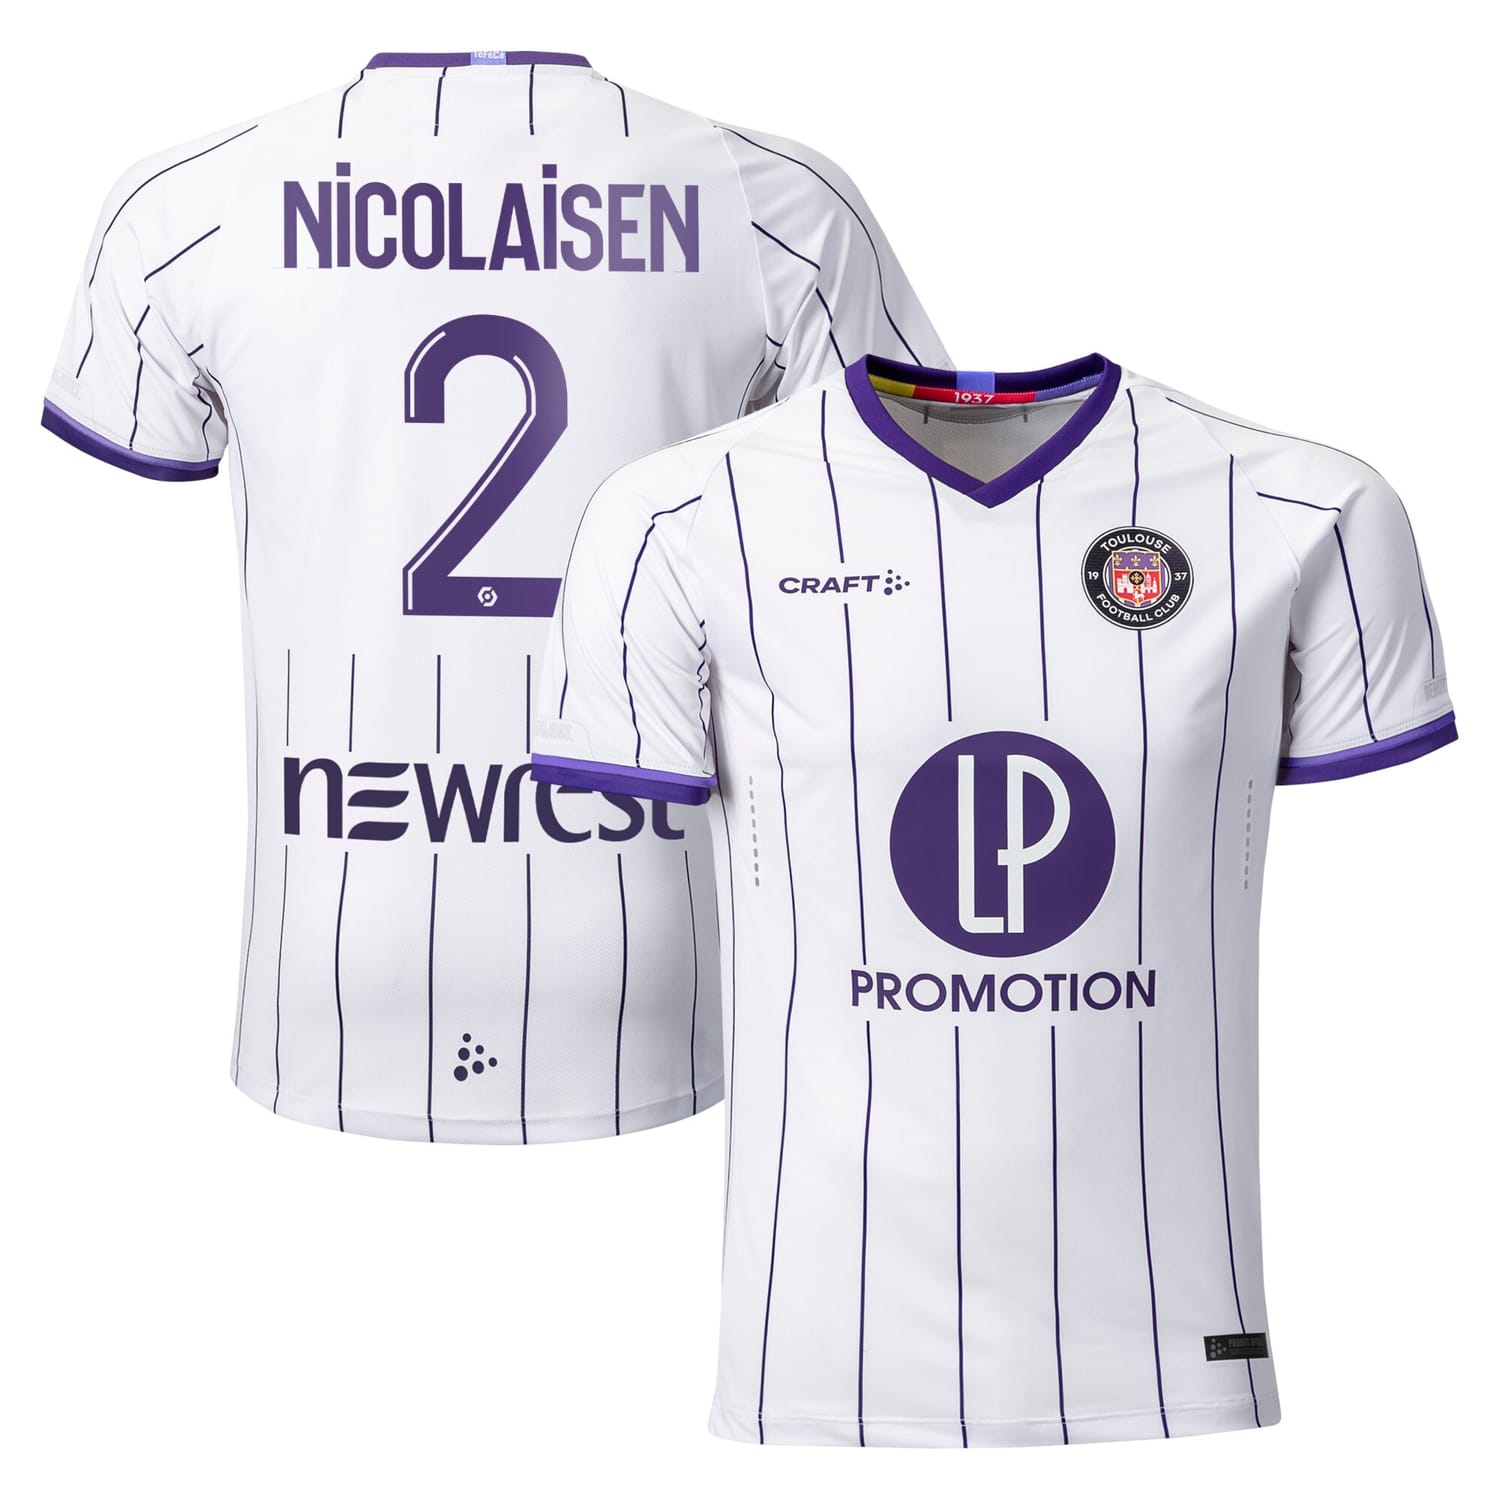 Ligue 1 Toulouse Home Pro Jersey Shirt 2022-23 player Rasmus Nicolaisen 2 printing for Men